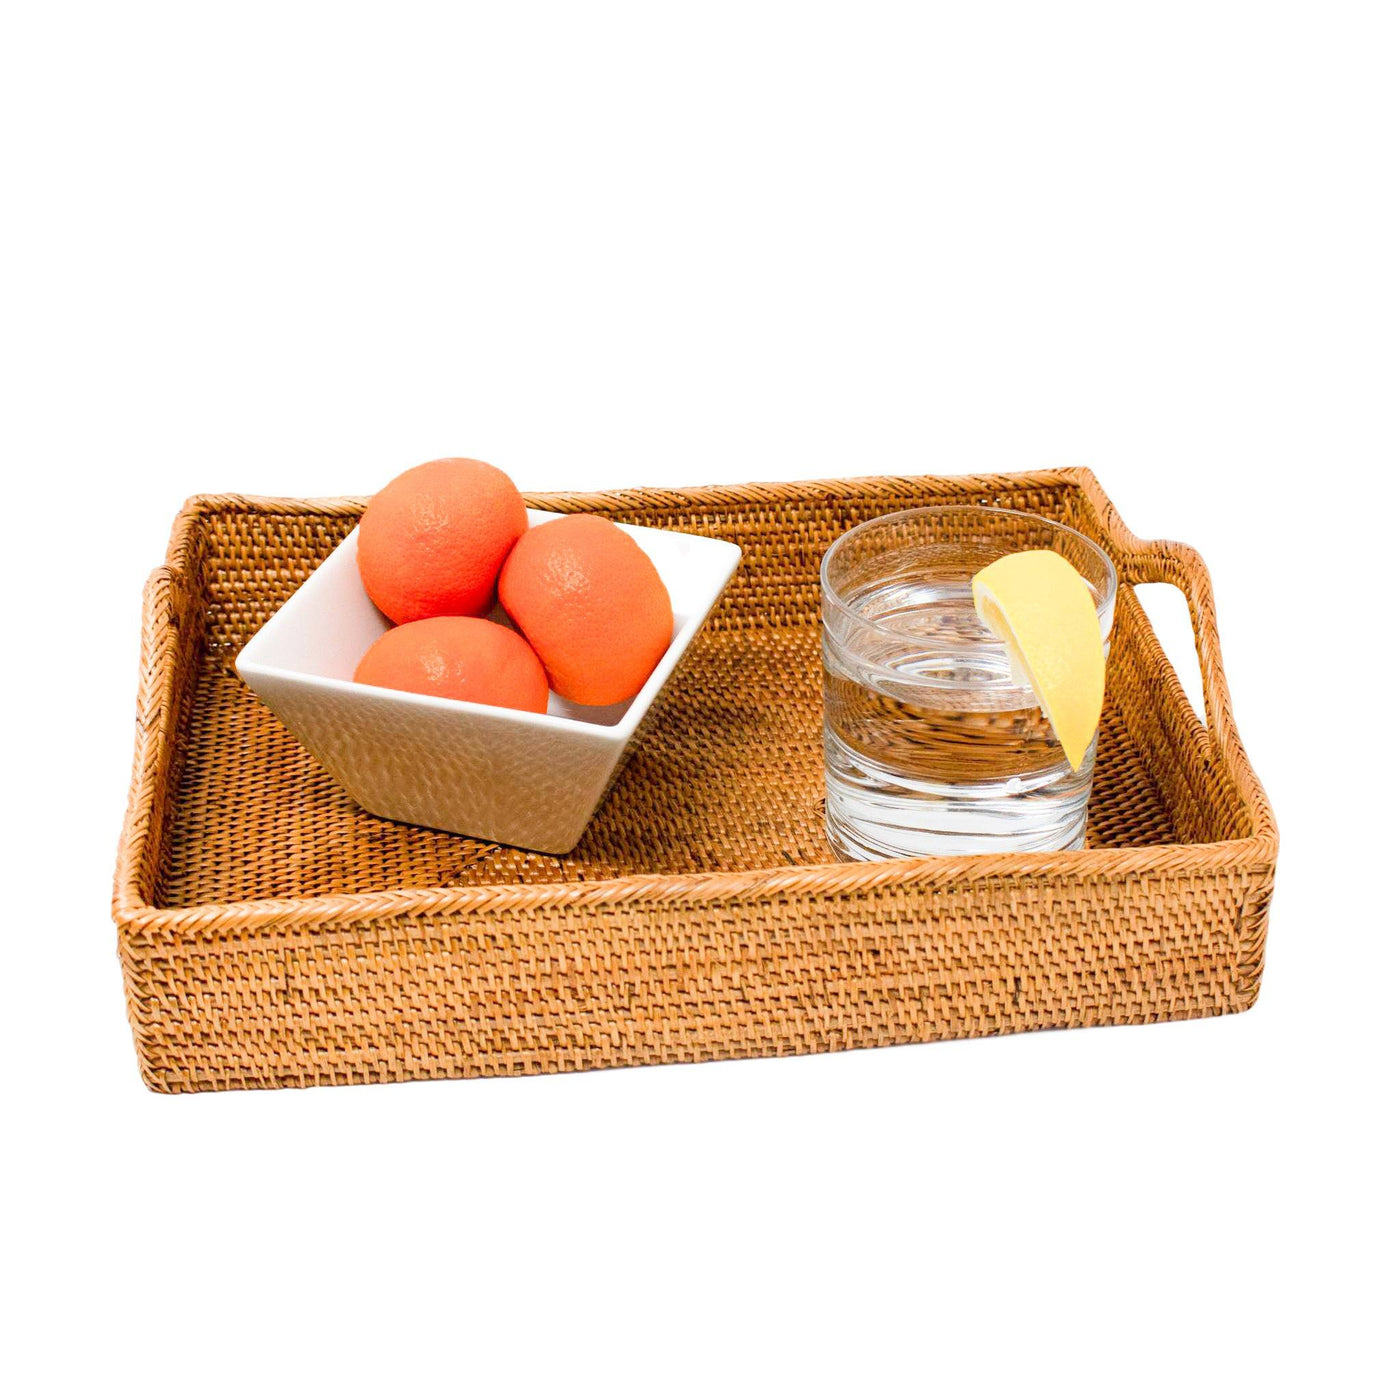 Rattan Tray with Handles by POPPY + SAGE